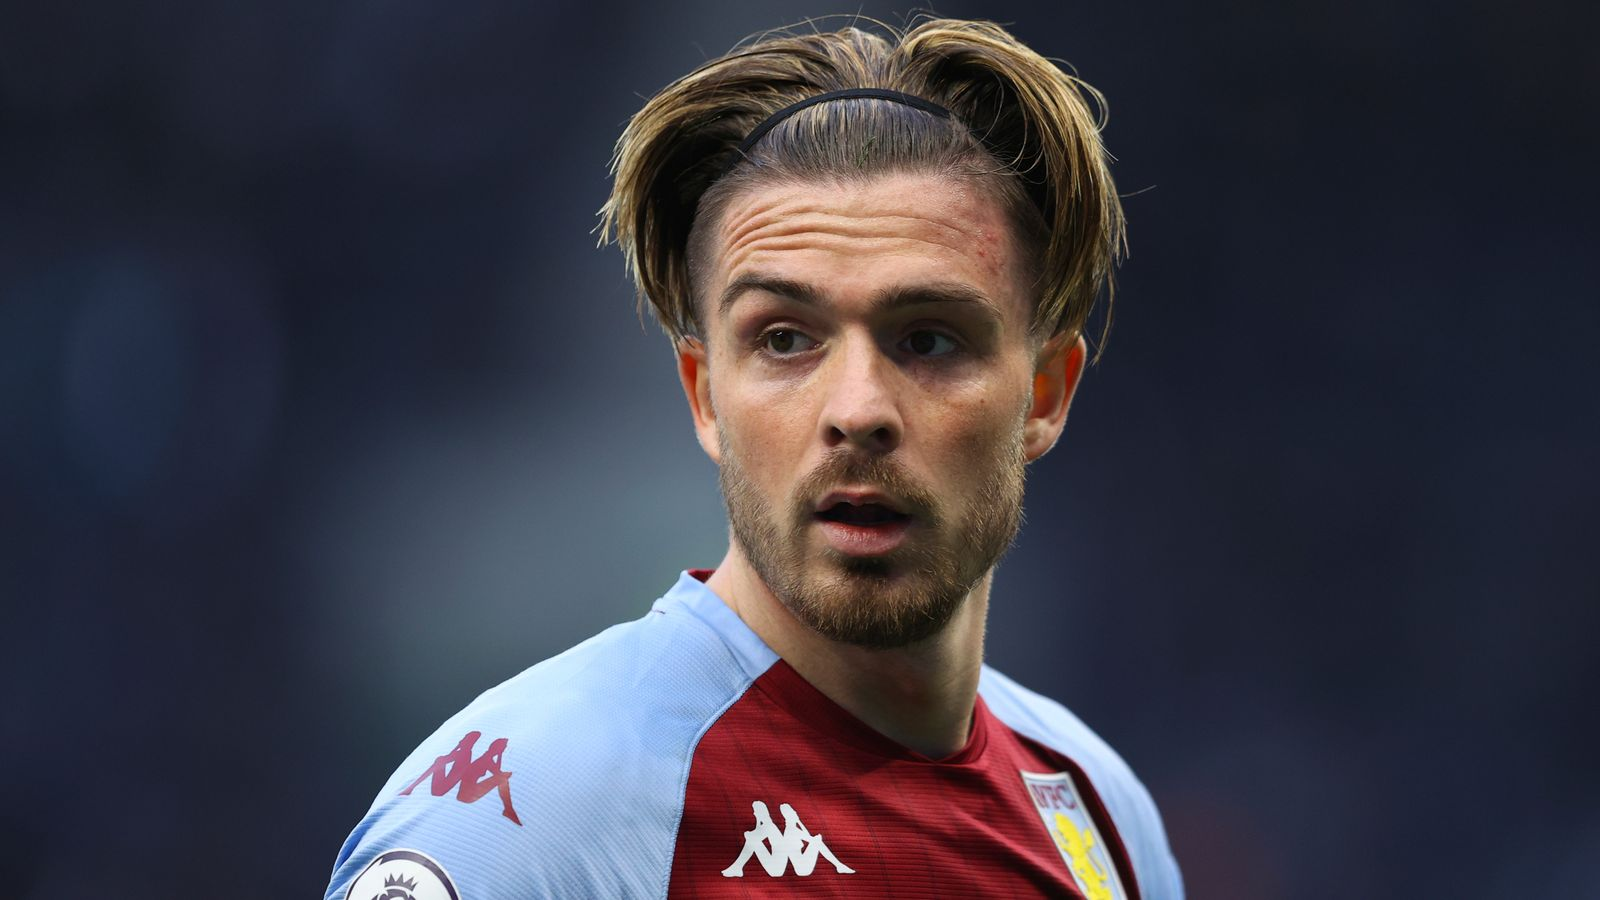 Jack Grealish is a well-known English football star